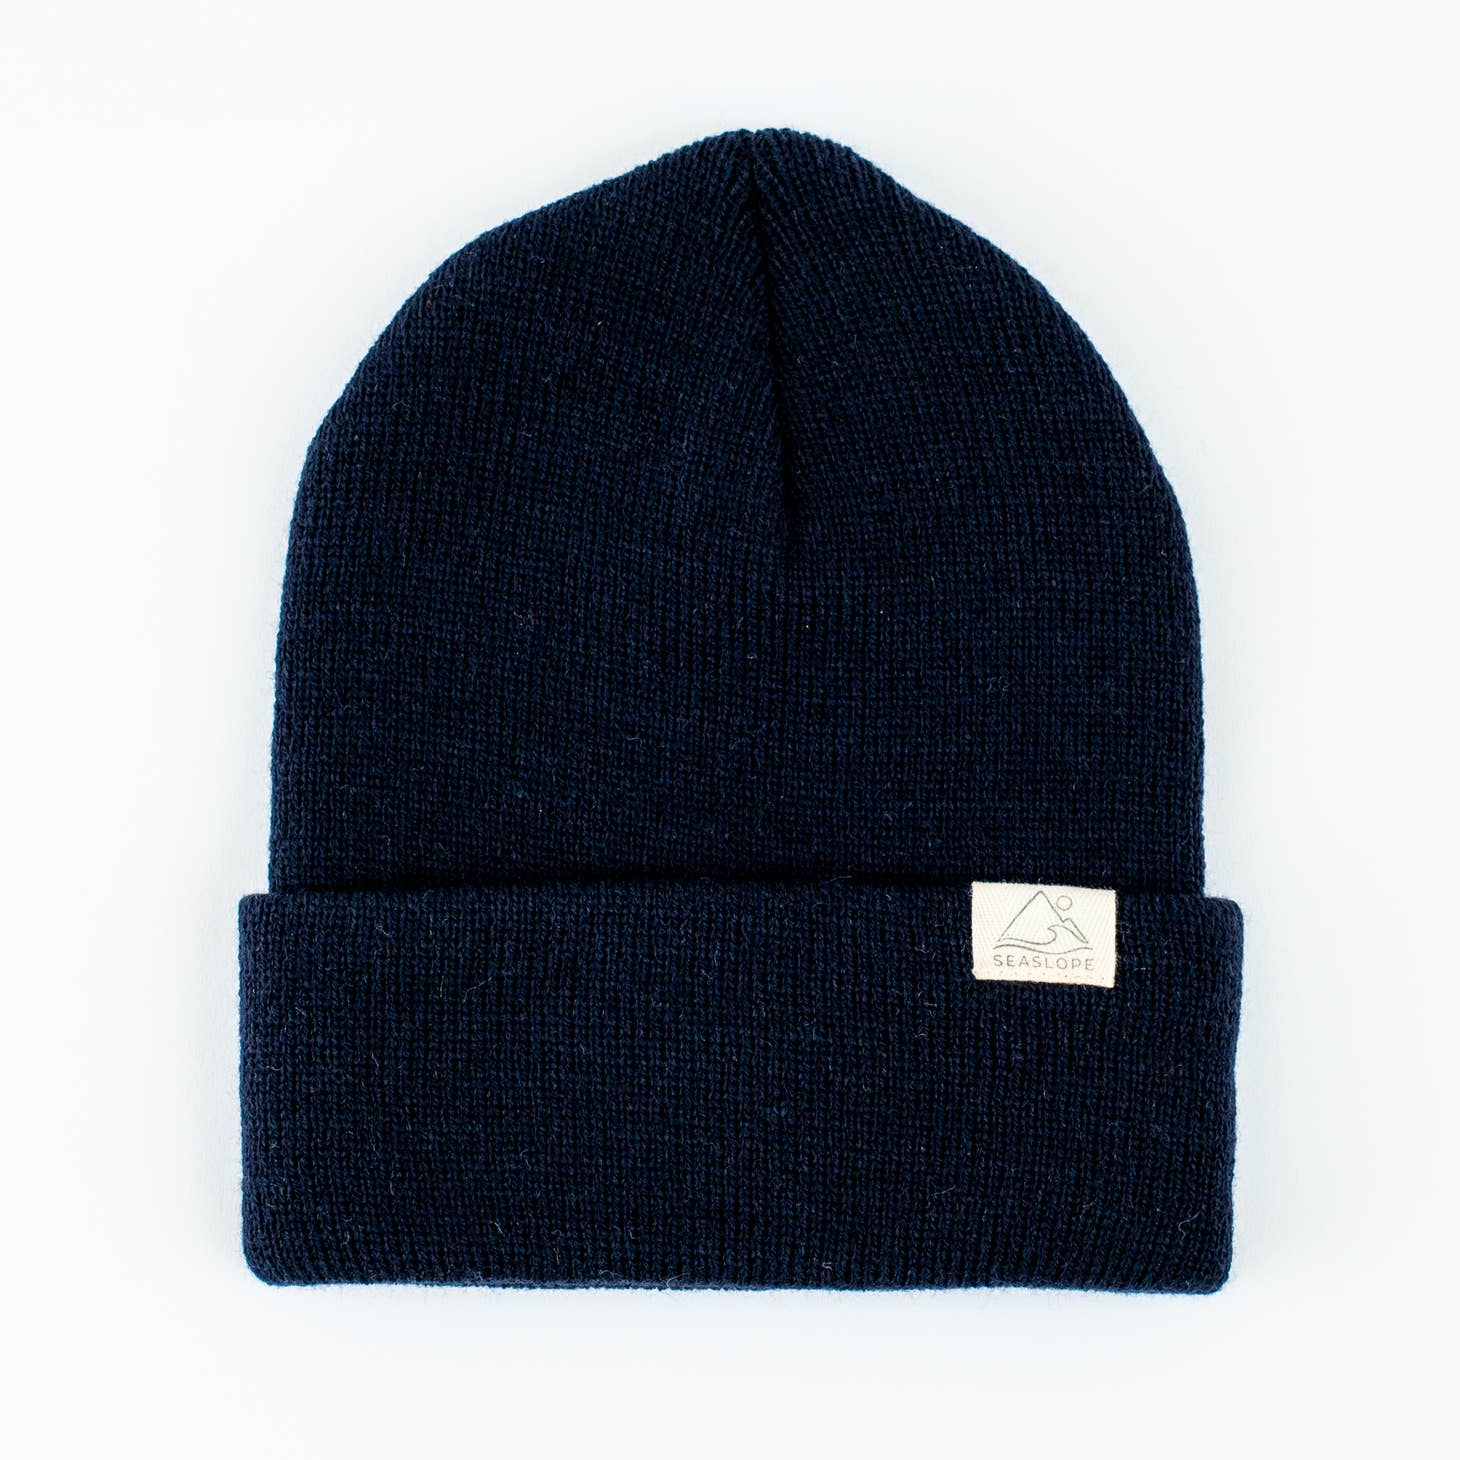 Beanie (Youth/Adult) - Navy Blue-Seaslope-Crying Out Loud